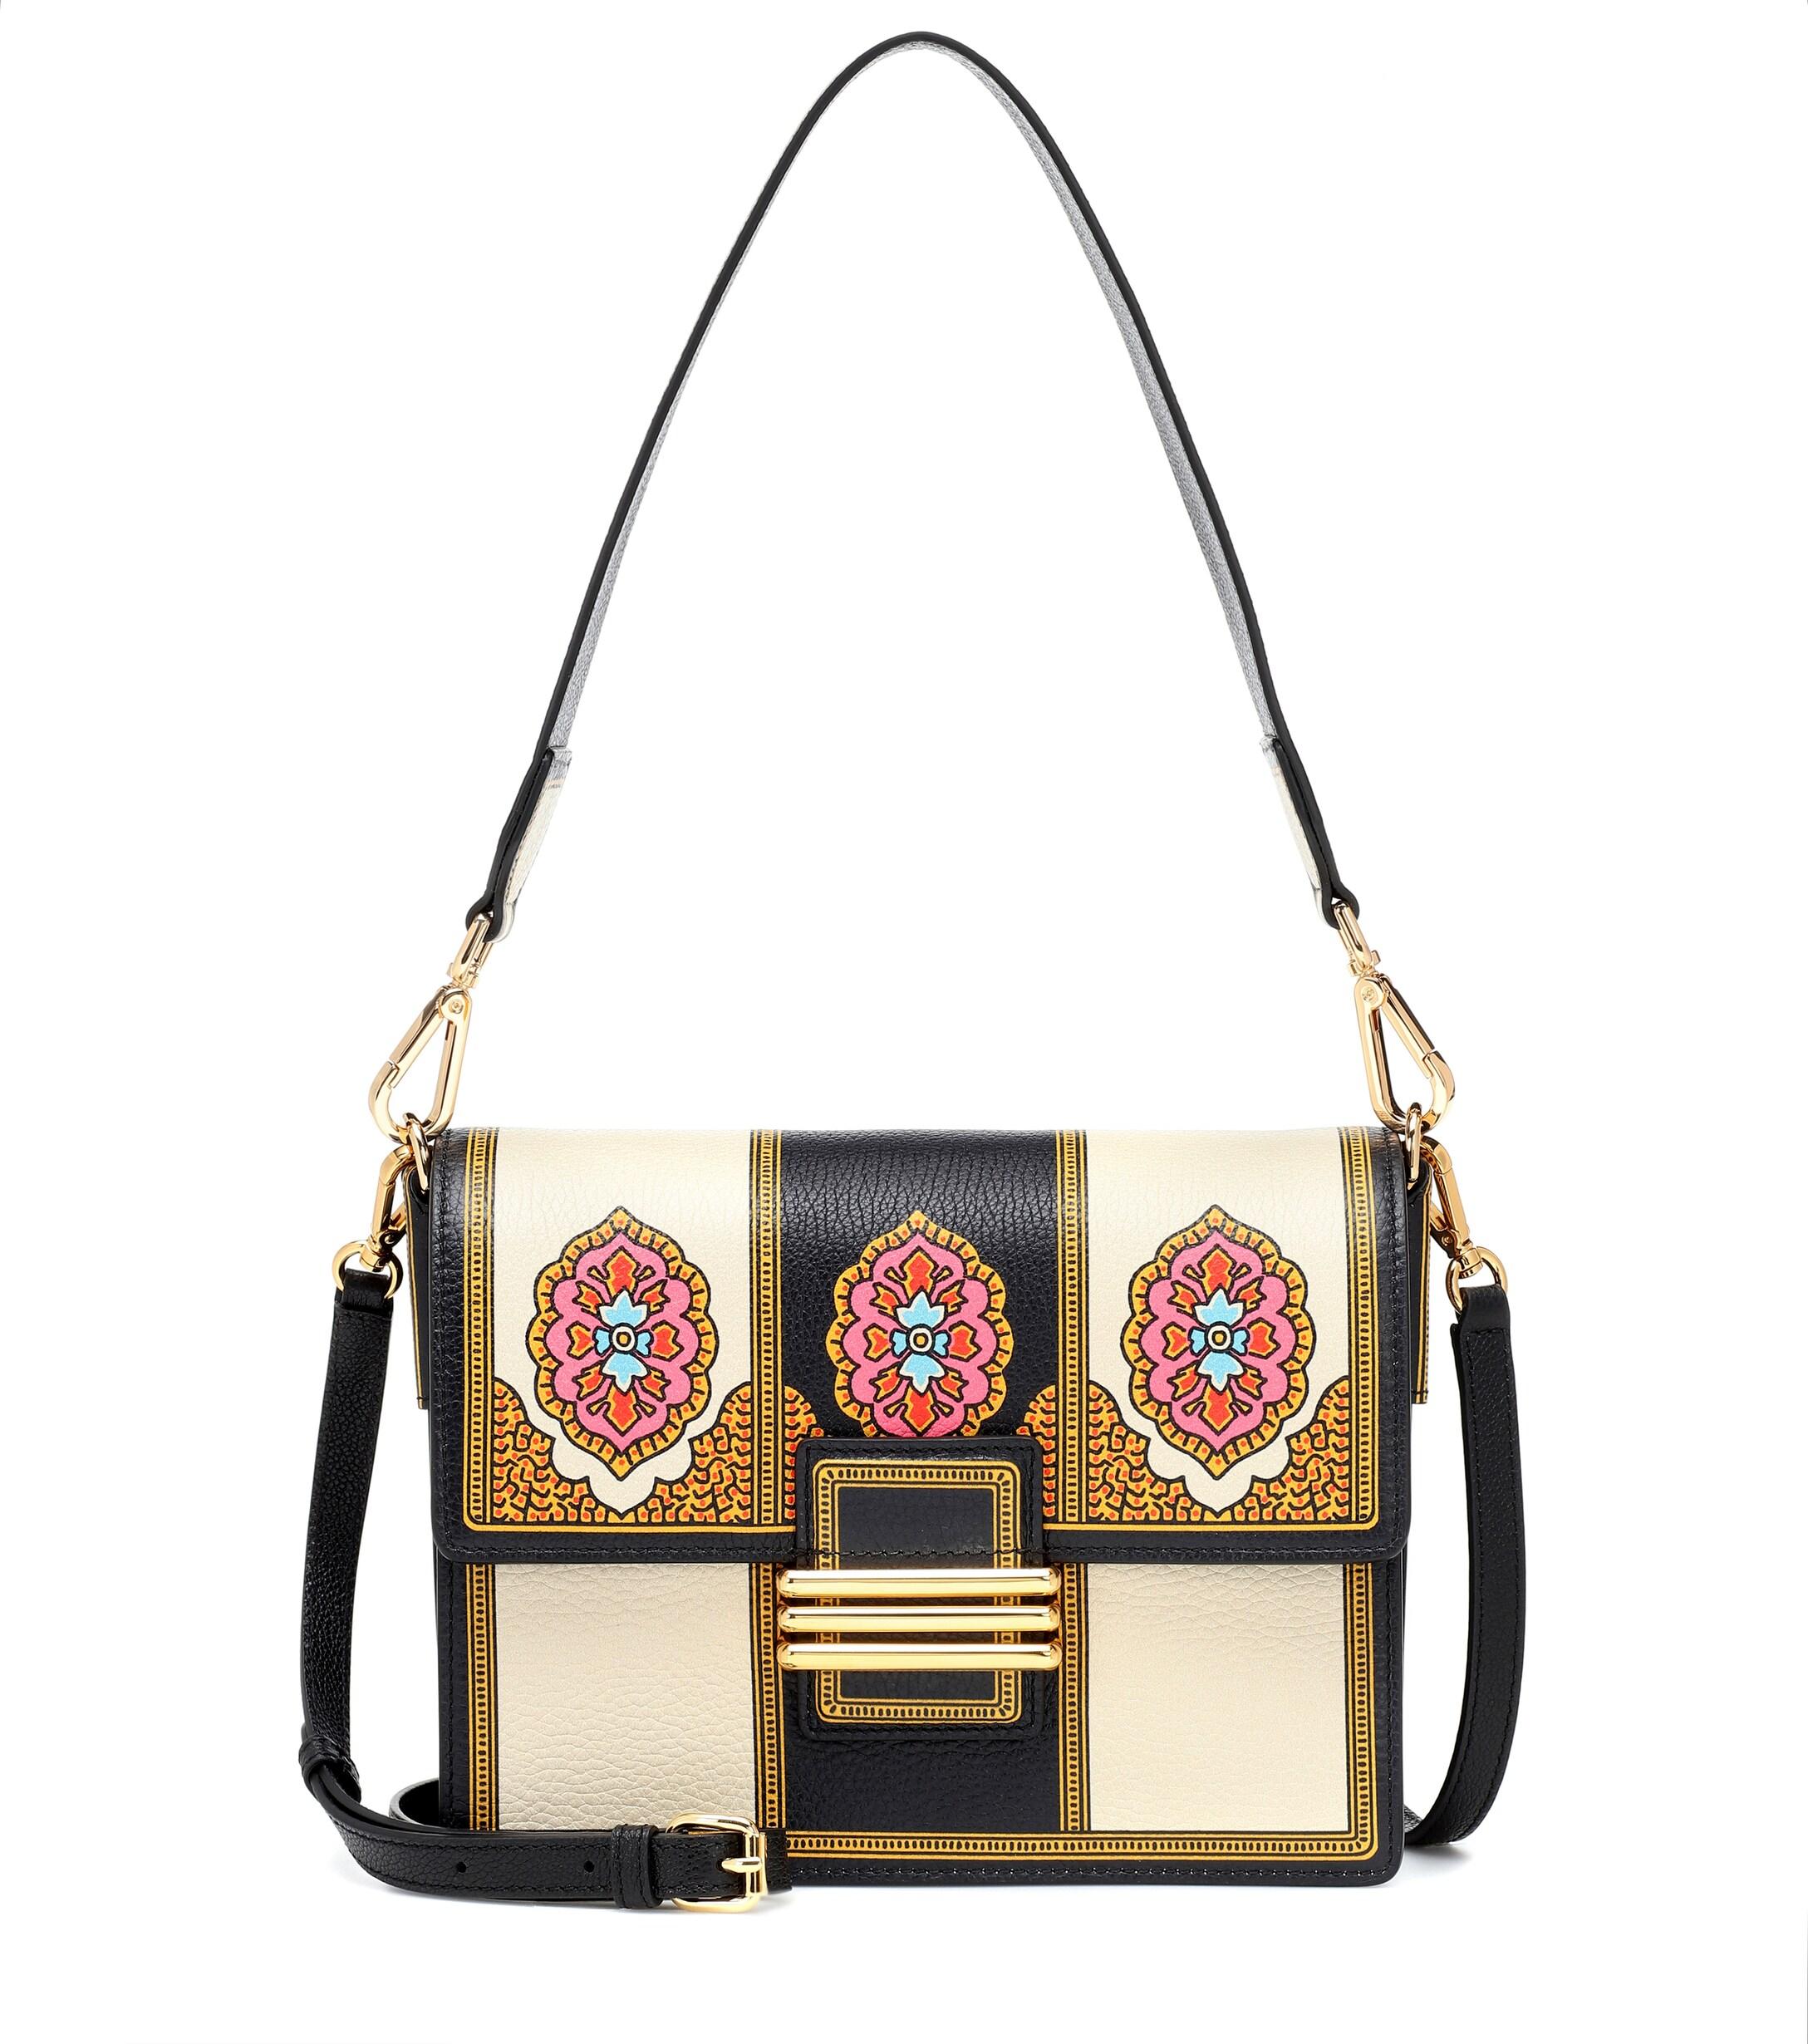 Etro Printed Leather And Suede Shoulder Bag in Black - Lyst